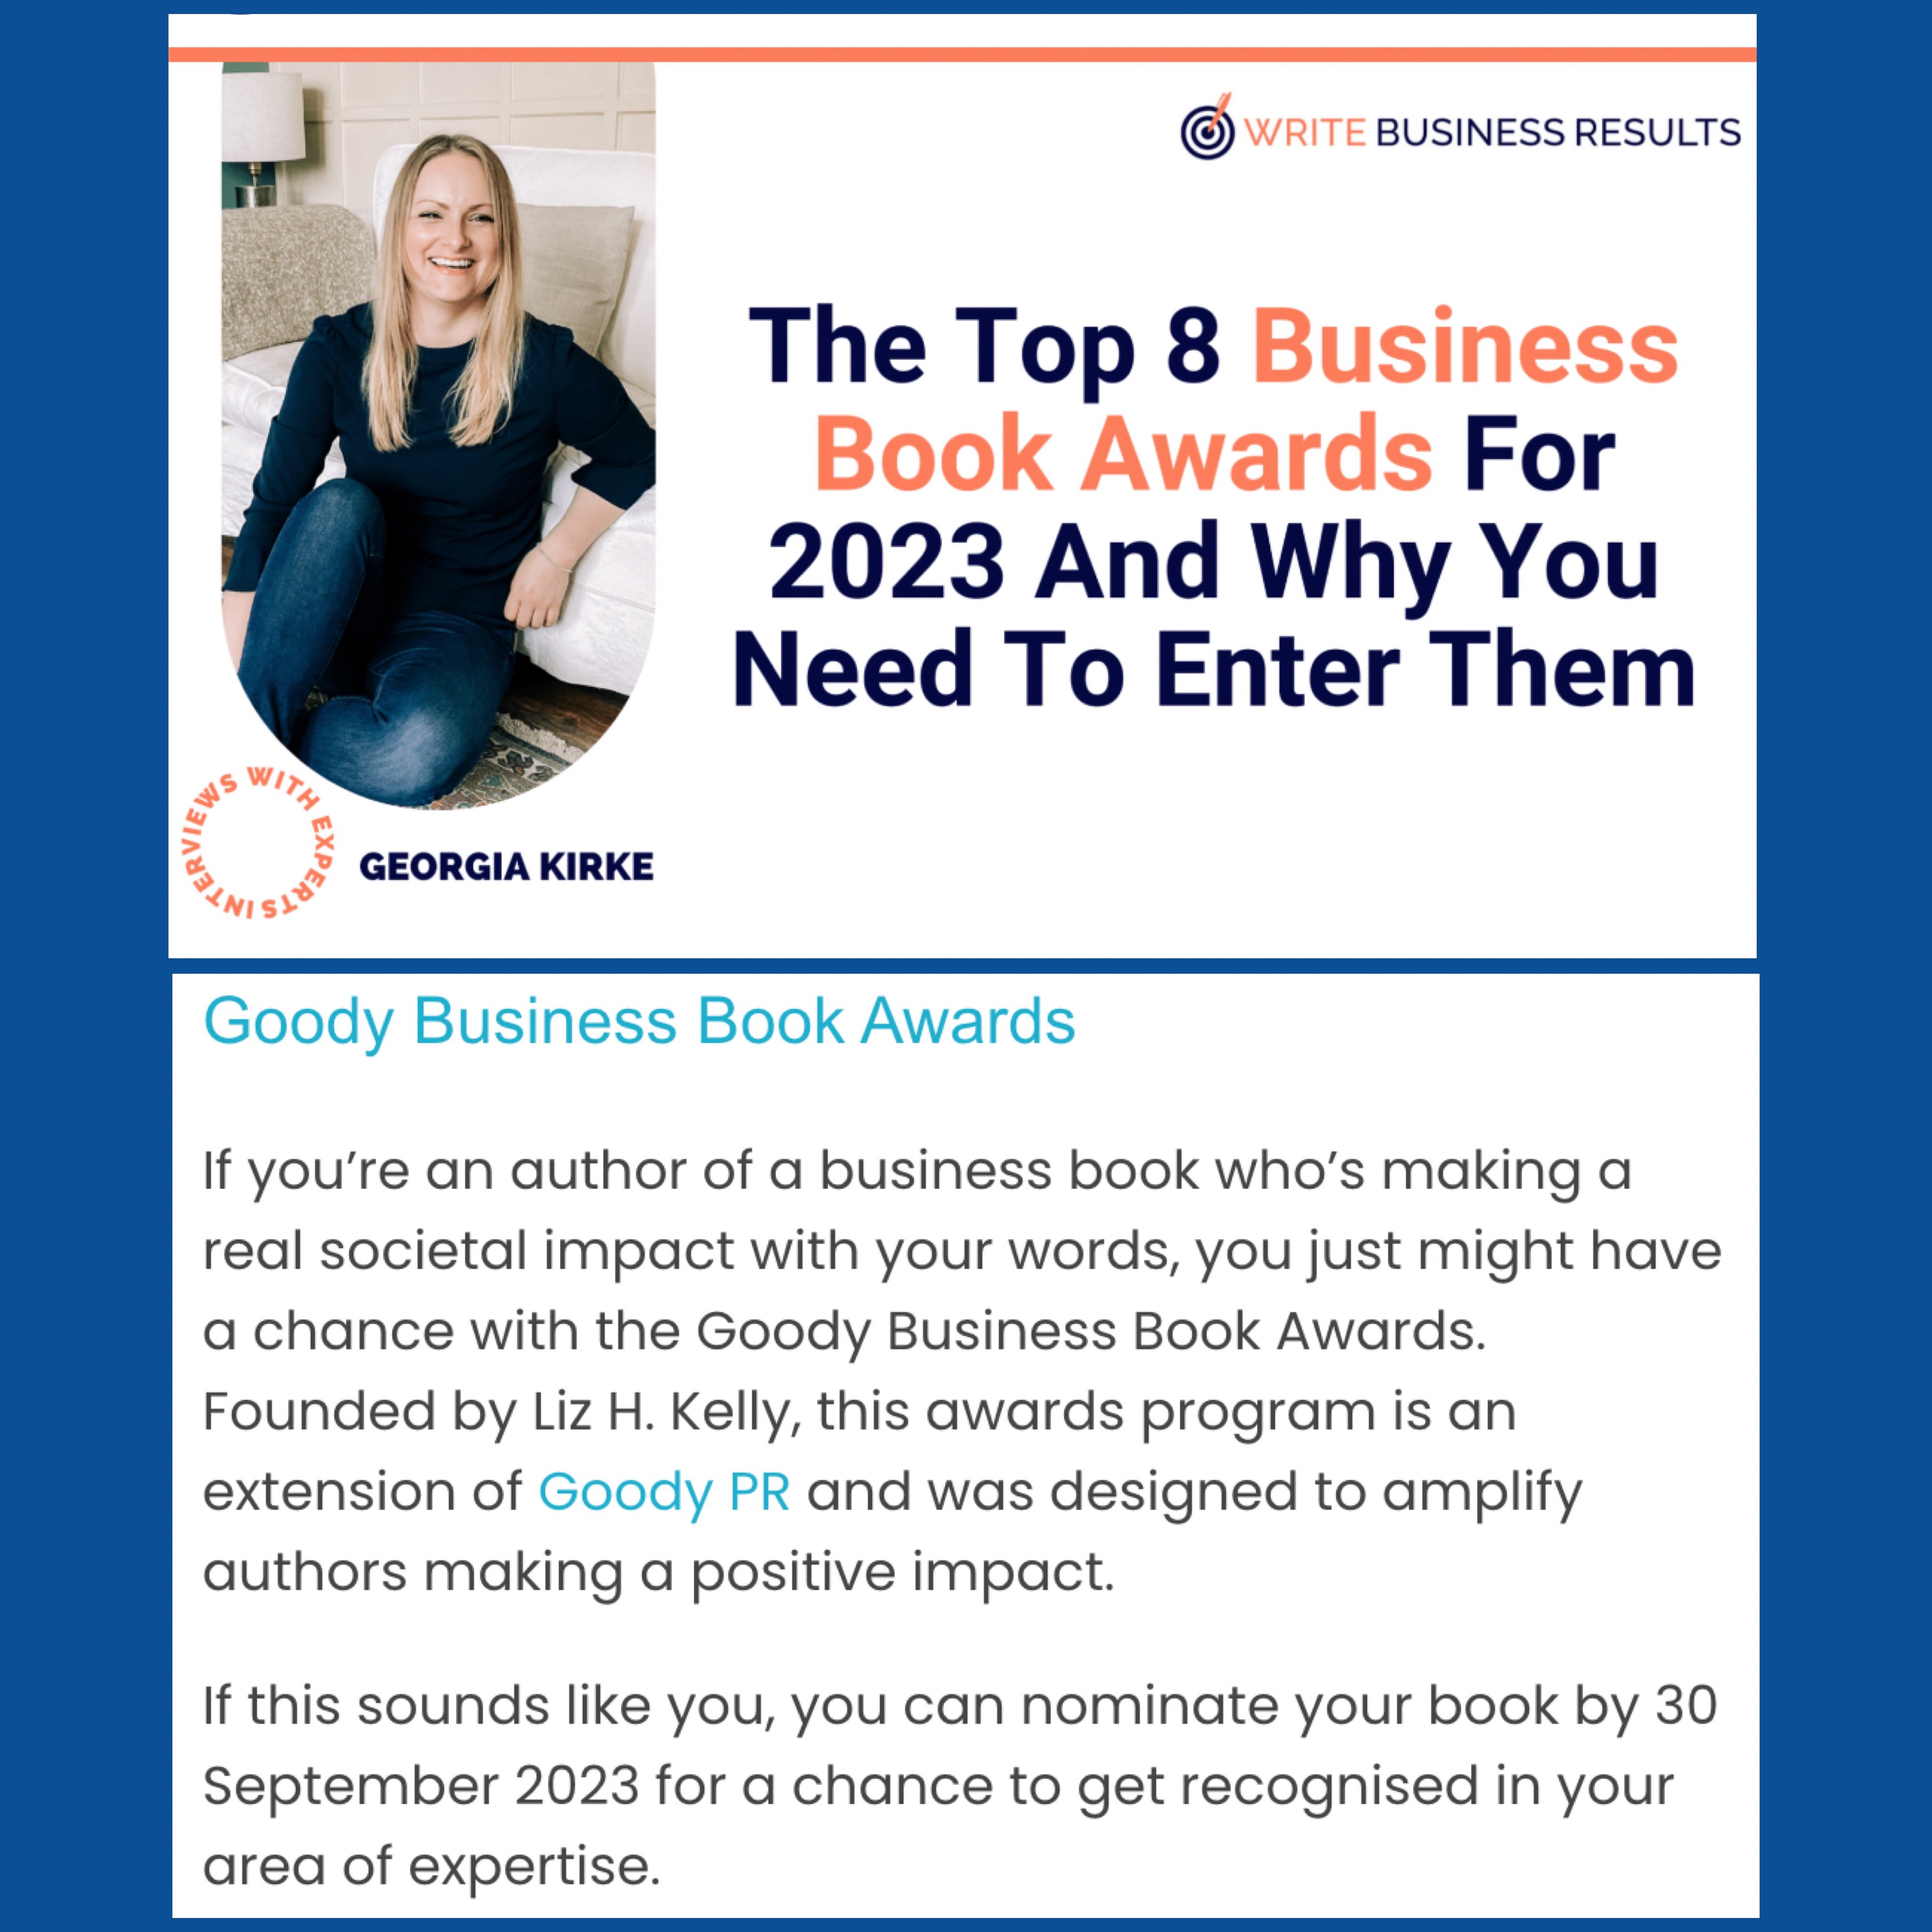 Write Business Results includes Goody Business Book Awards in their Top 8 Business Book Awards for 2023.